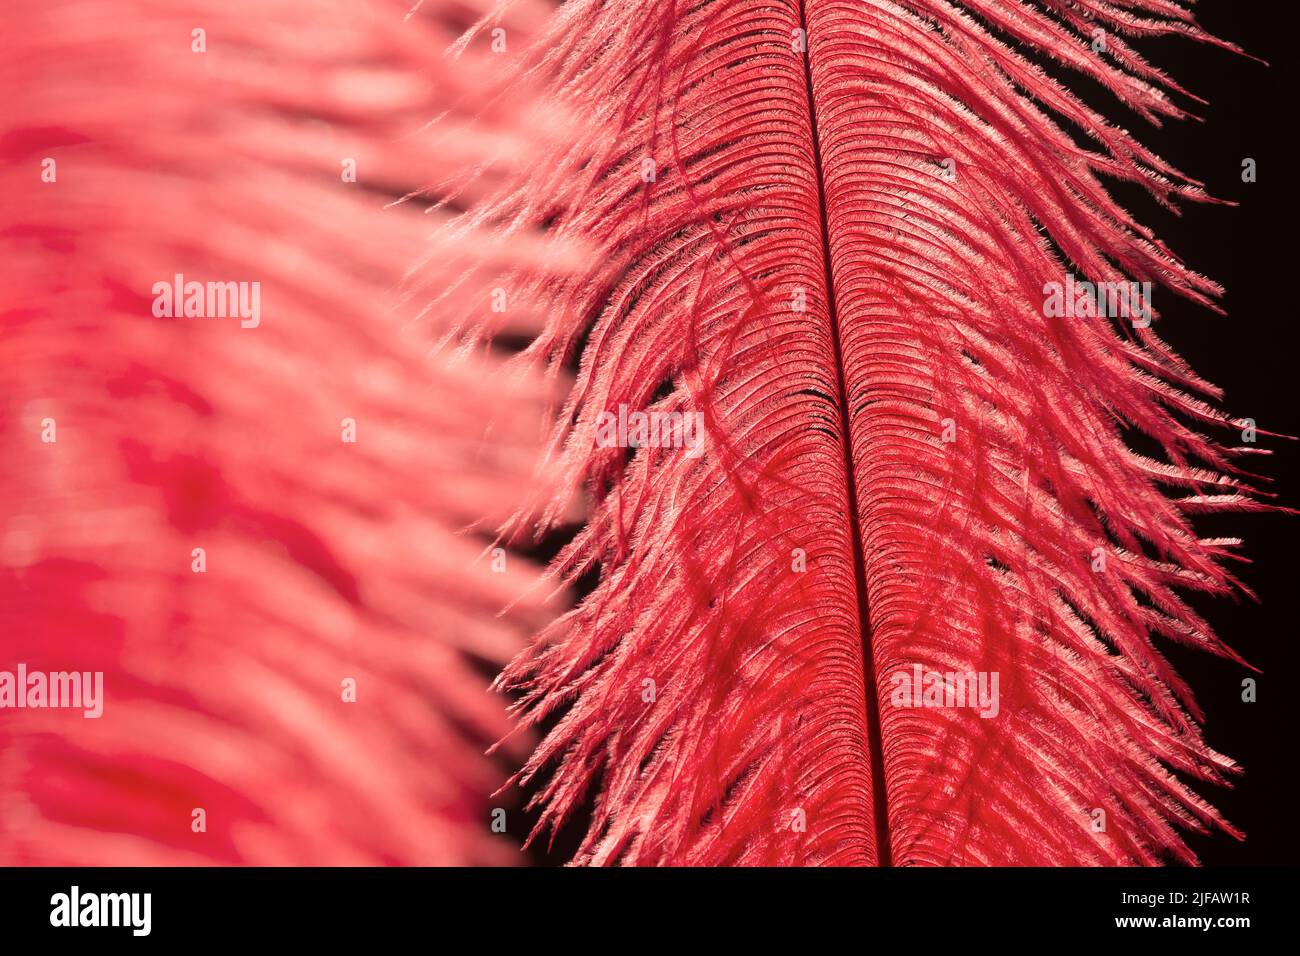 Delicate red ostrich feathers Stock Photo